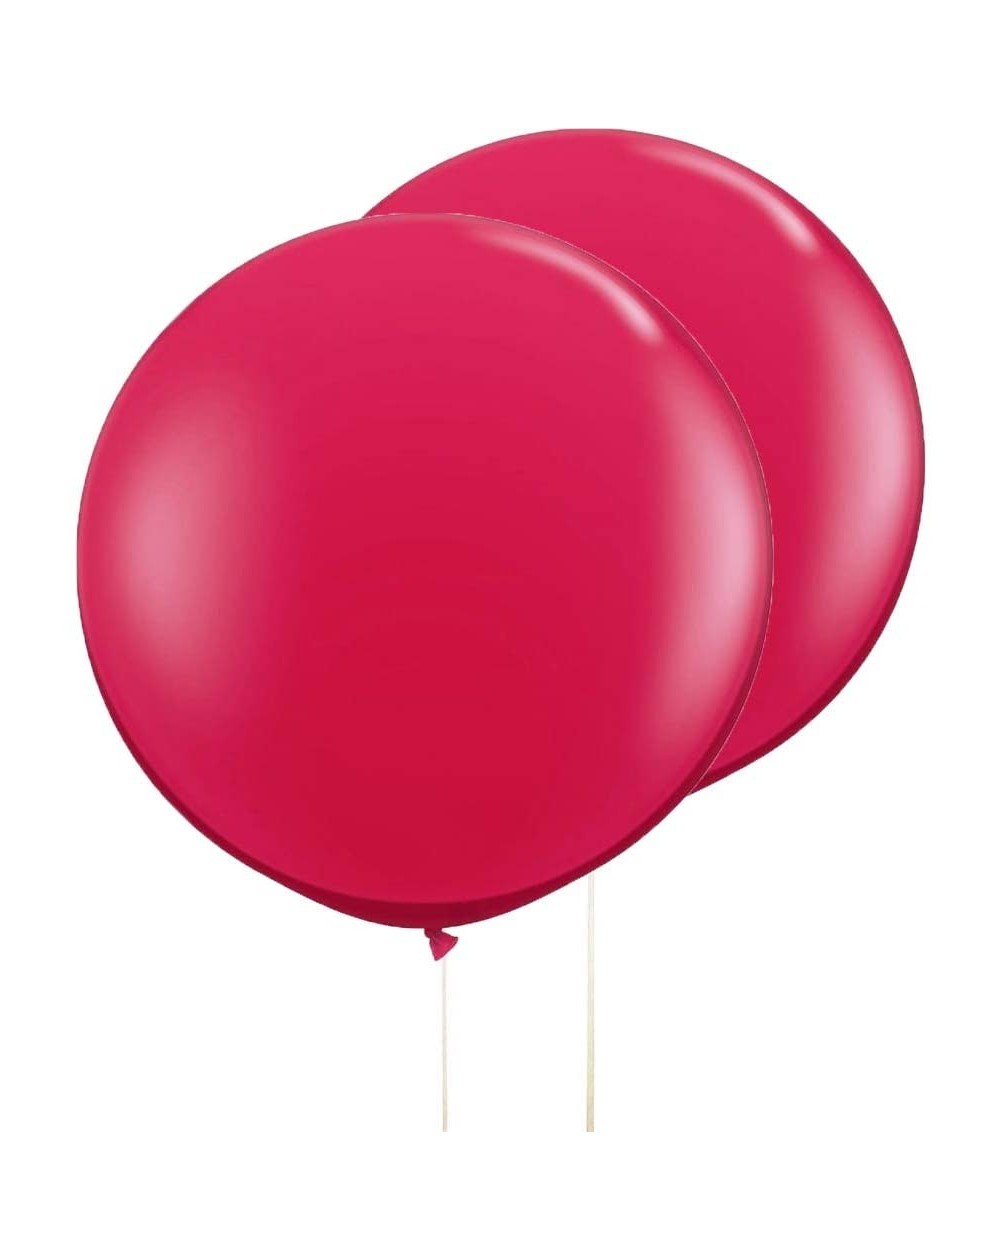 Balloons 36 In Big Balloons Hot Pink 5 Pack Thicken Gaint Round Latex Party Balloons - Hot Pink - CU18OREHTGR $12.62